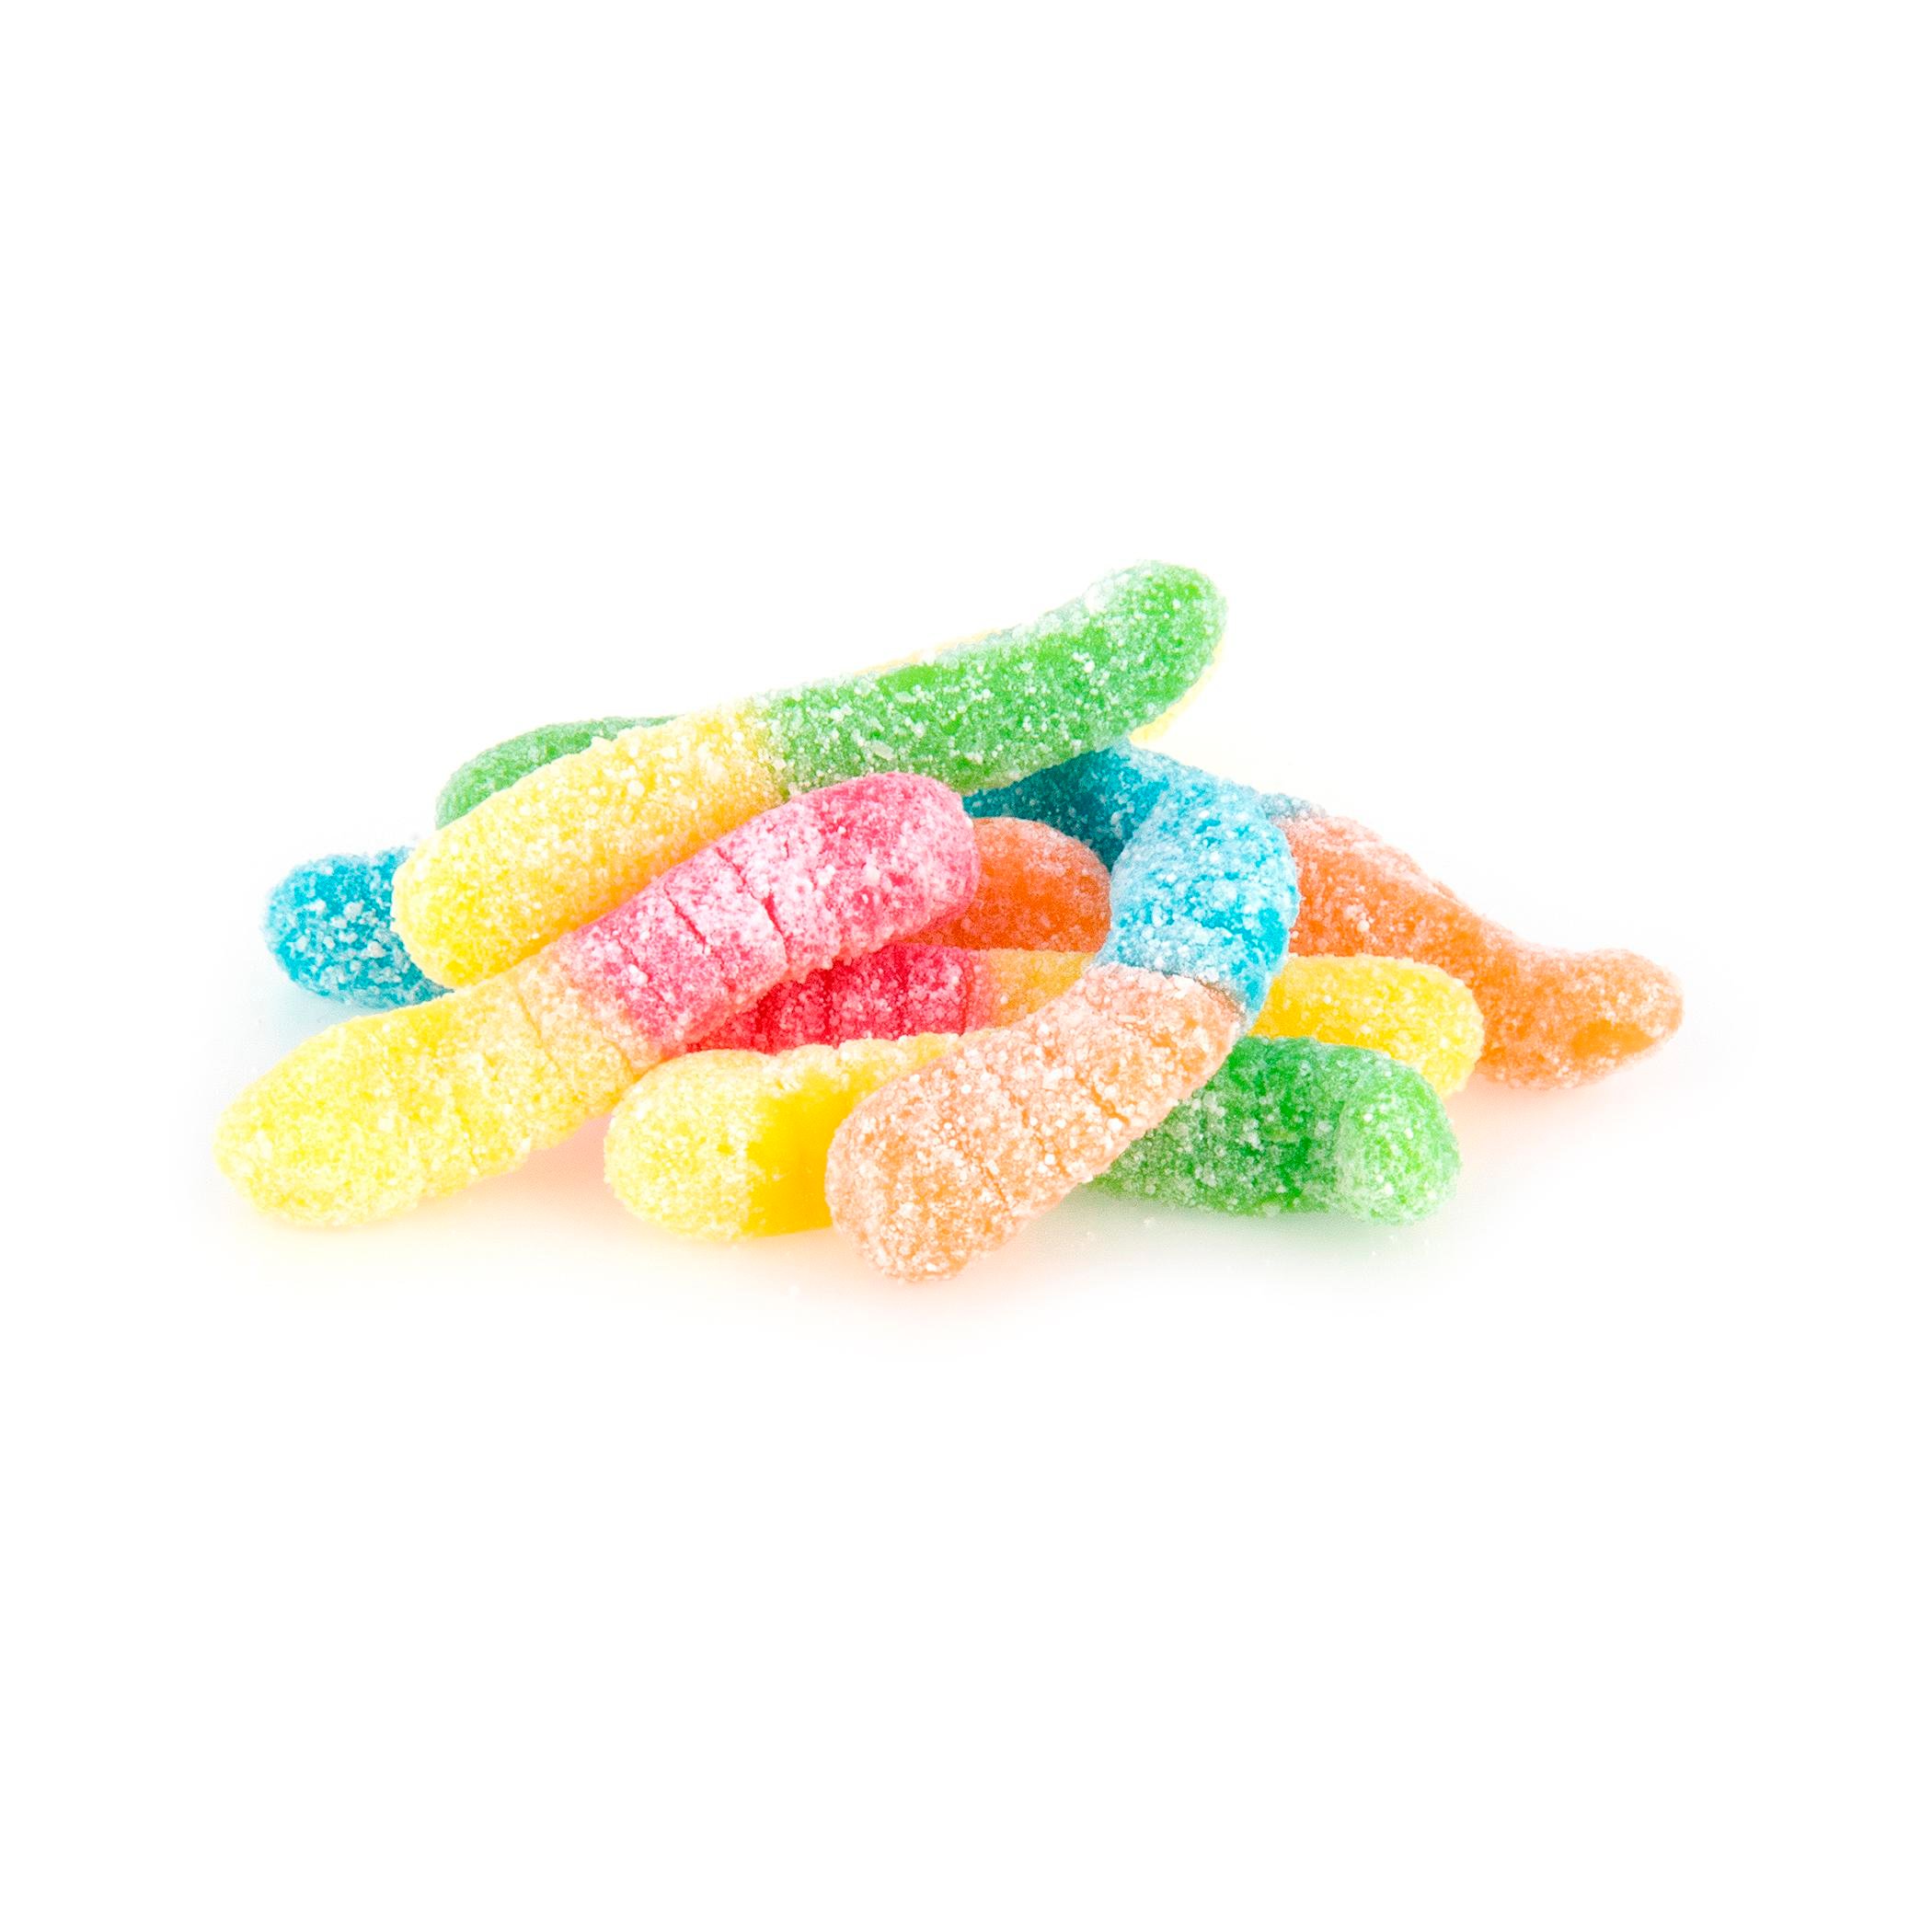  Sour Mini Neon Worms Candy - 1 Lb.